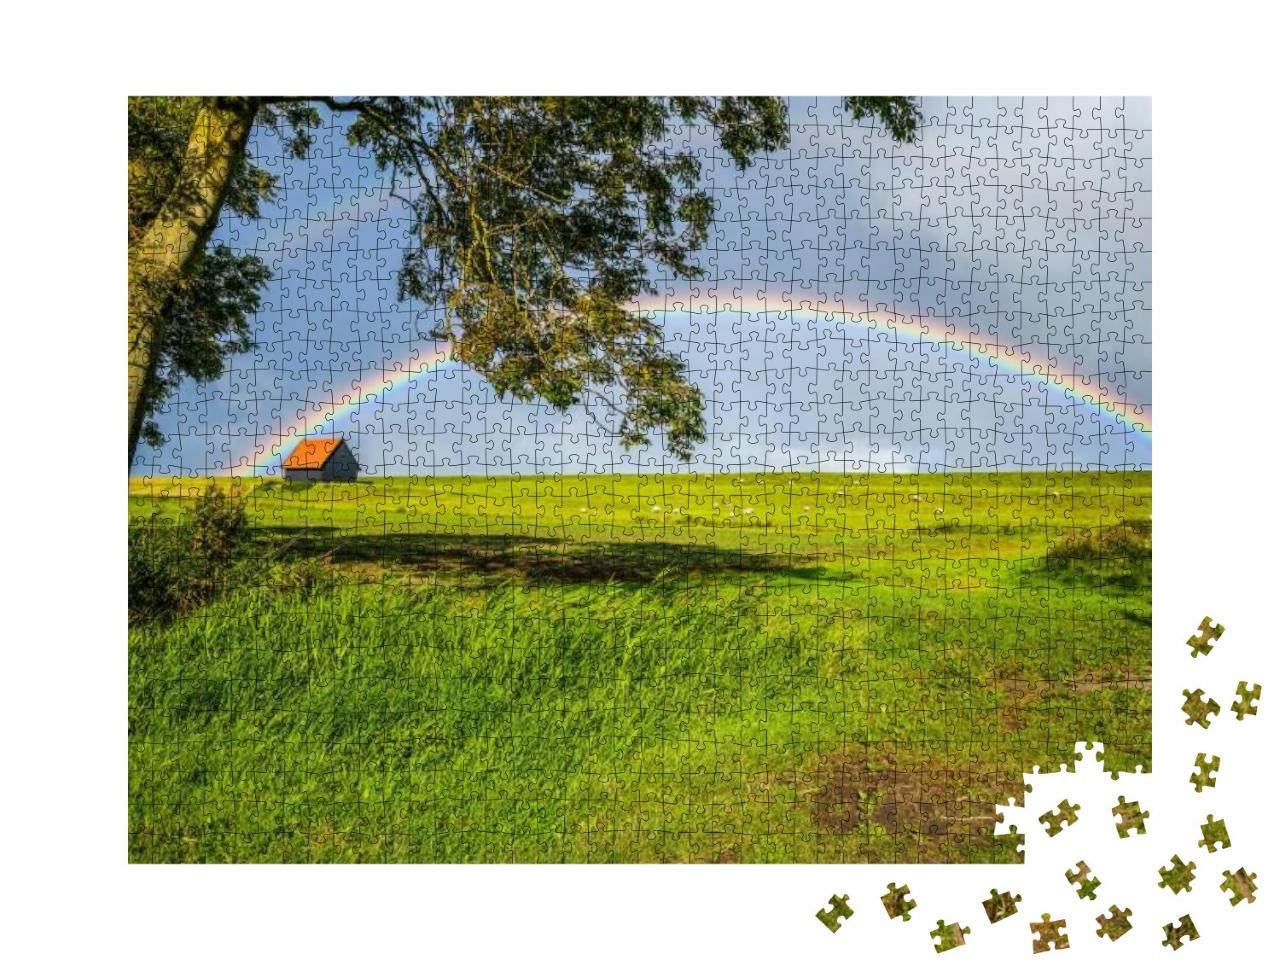 Rainbow in Sky Clouds Over Rural House Lawn Summer Field... Jigsaw Puzzle with 1000 pieces